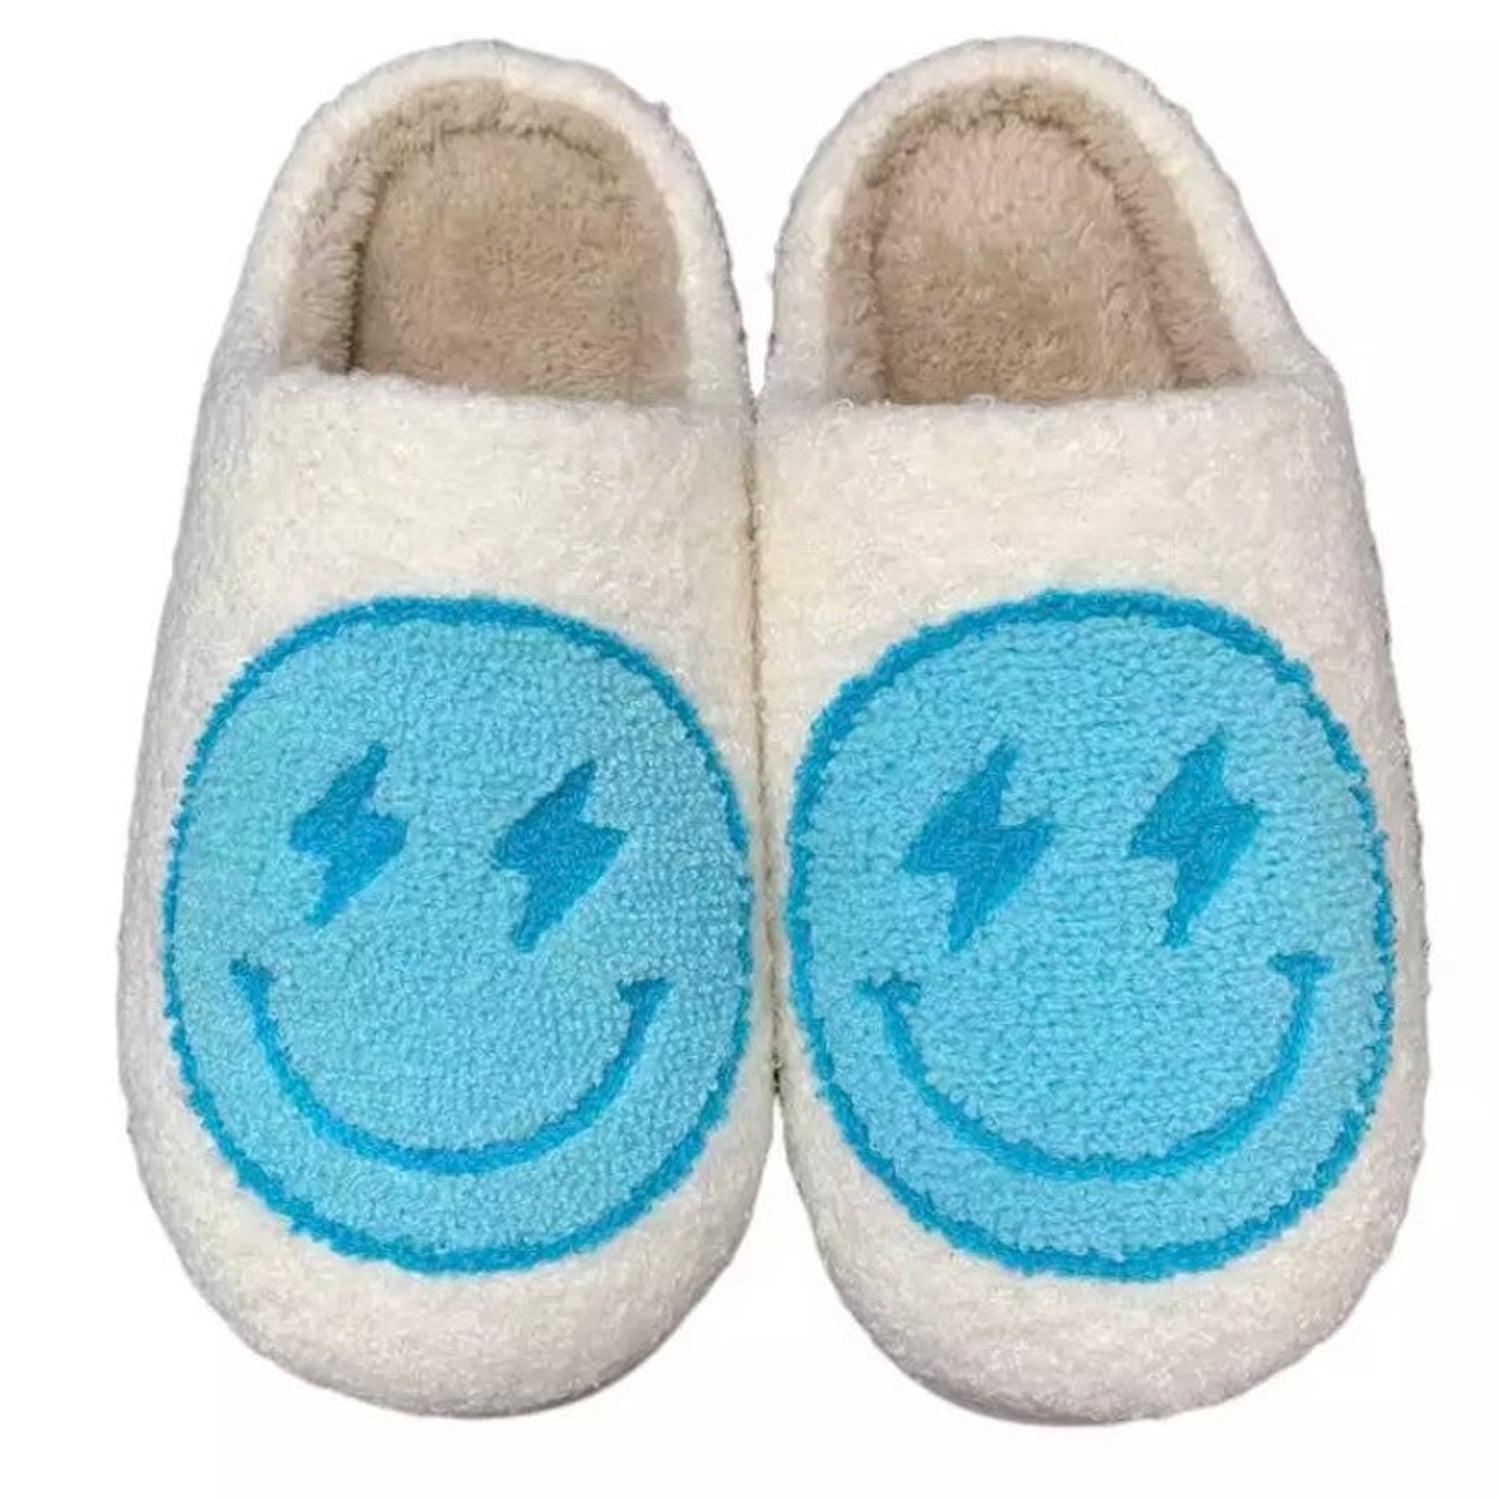 beloning zaterdag officieel PacificPlex Womens Smiley Fuzzy Preppy Smile Slippers Retro Cozy Comfy  Plush Warm Slip-on Happy Face Slippers Winter Casual Indoor Soft Fluffy  House Shoes (9-10.5, Blue-Lightning-Bolt) - Walmart.com